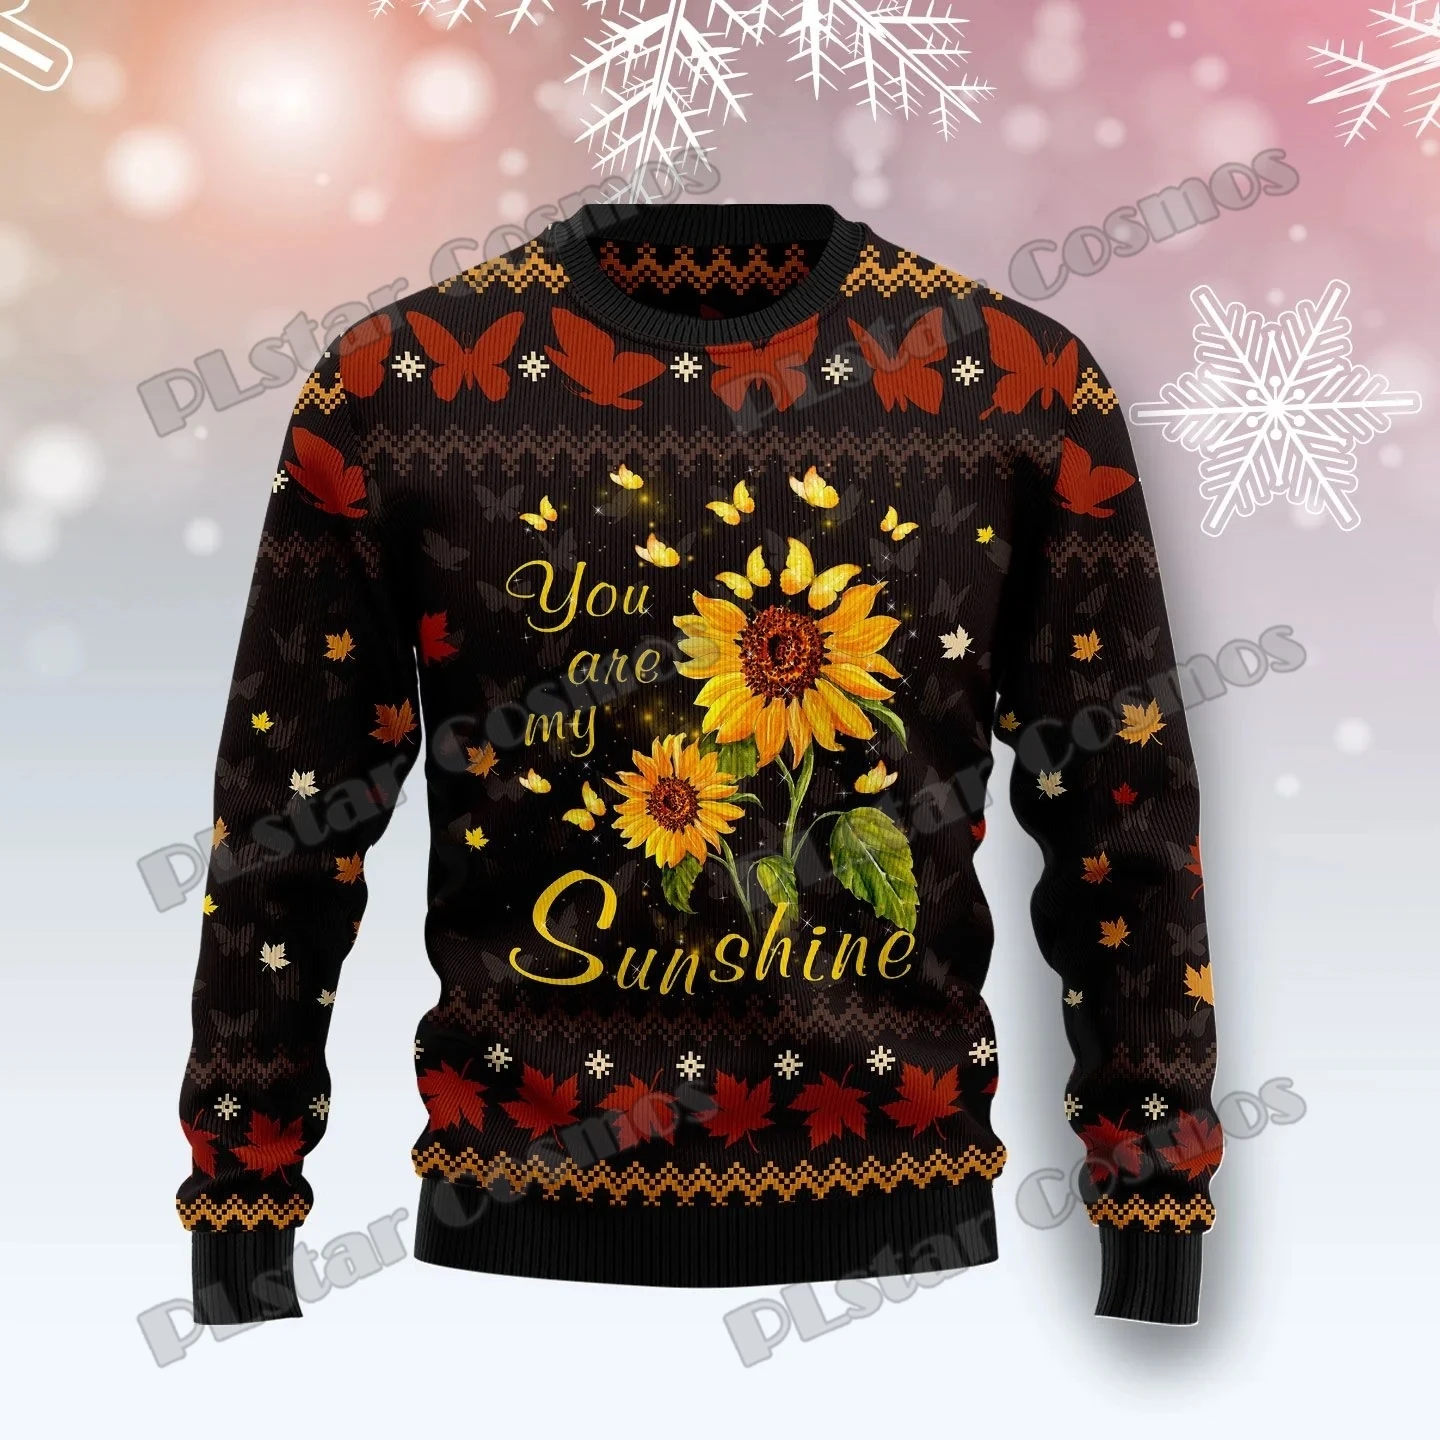 PLstar Cosmos Butterfly Sunshine 3D Printed Fashion Men's Ugly Christmas Sweater Winter Unisex Casual Knitwear Pullover MYY31 plstar cosmos 3d printed horse hobby animal fashion sweatshirt casual zipper hoodie fun jacket unisex clothing style 25